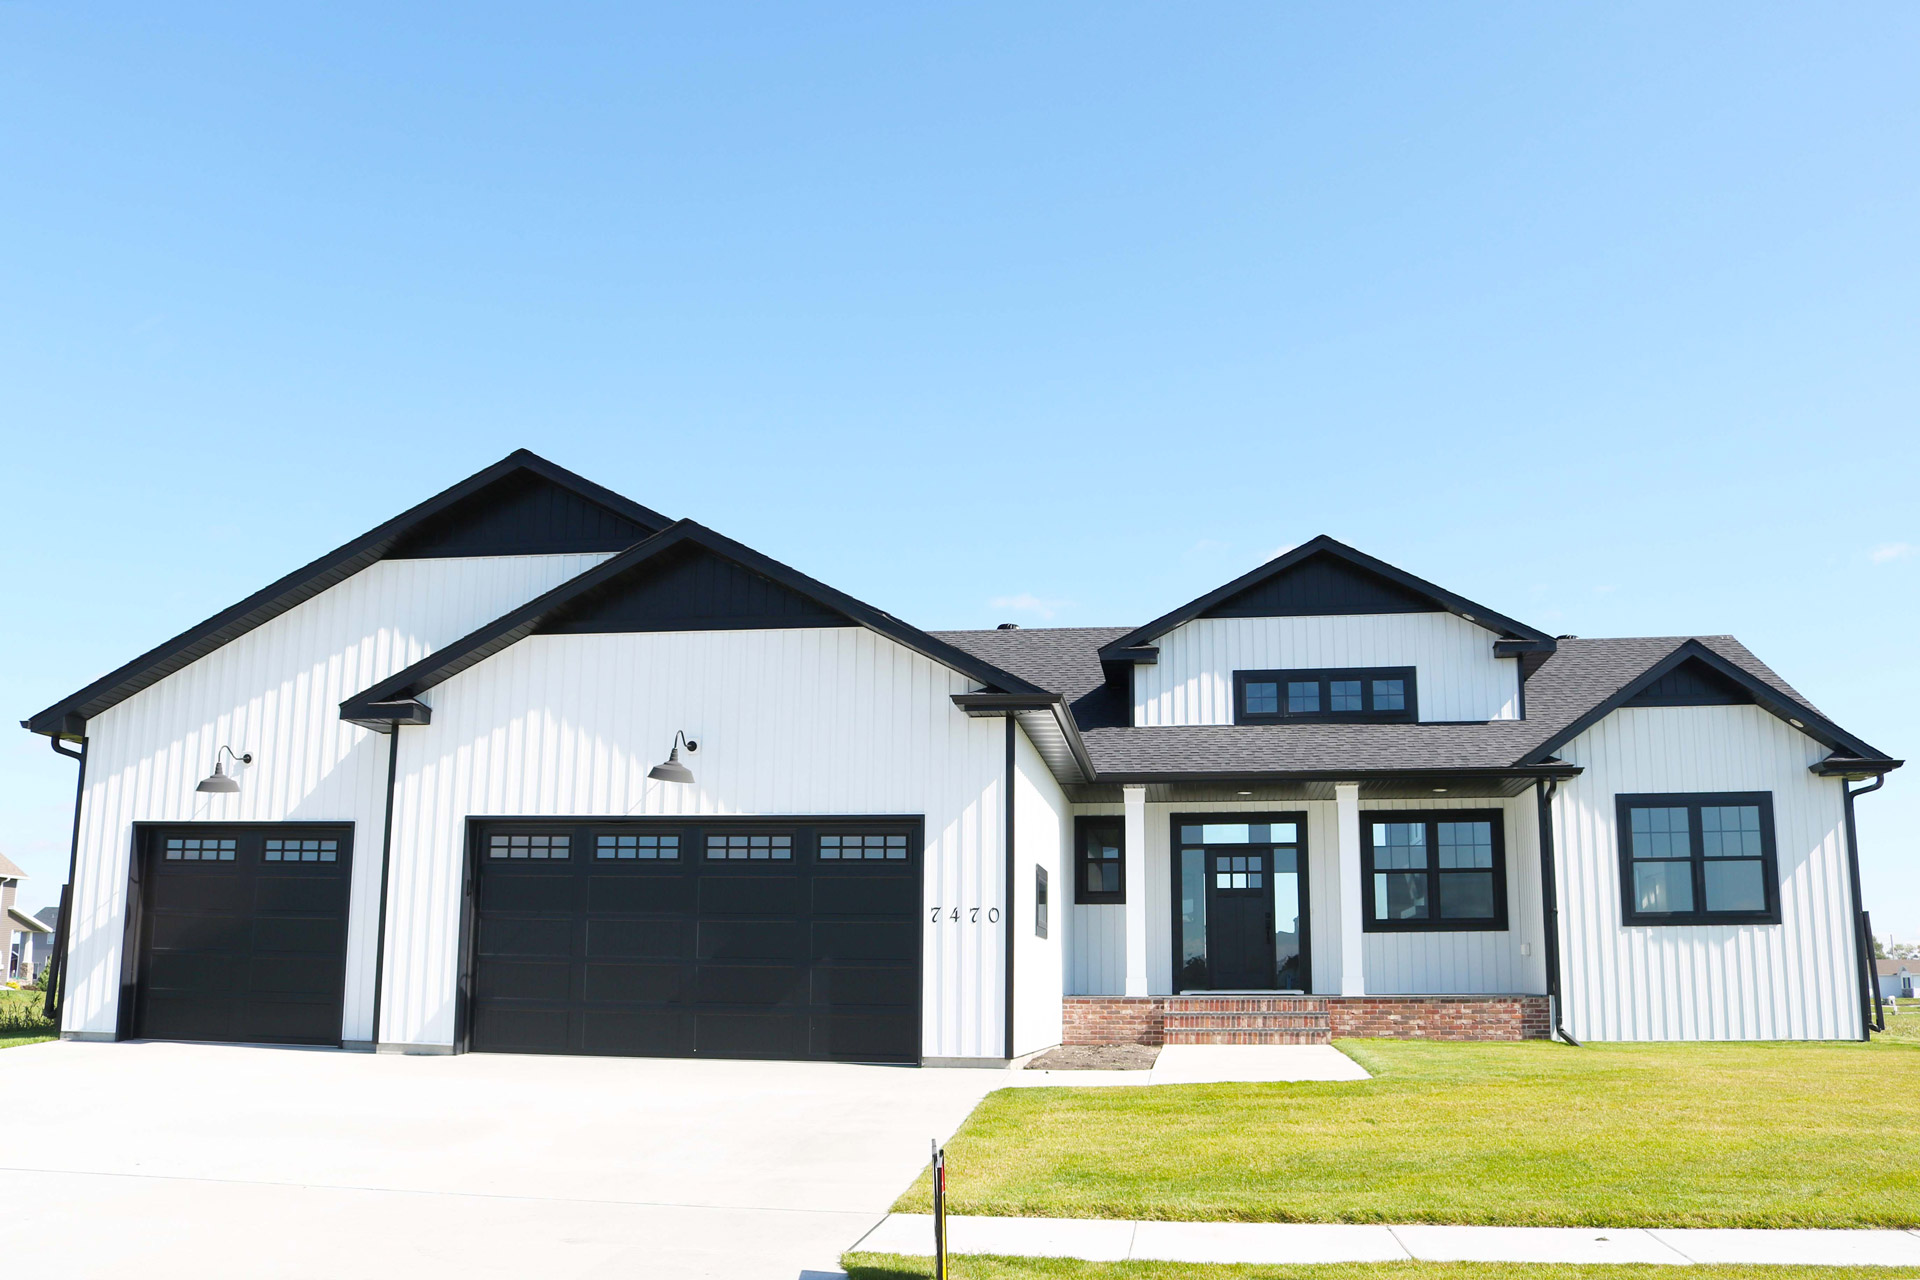 8 HOMES TO TOUR DURING THE 2019 FALL PARADE OF HOMES Hero Image